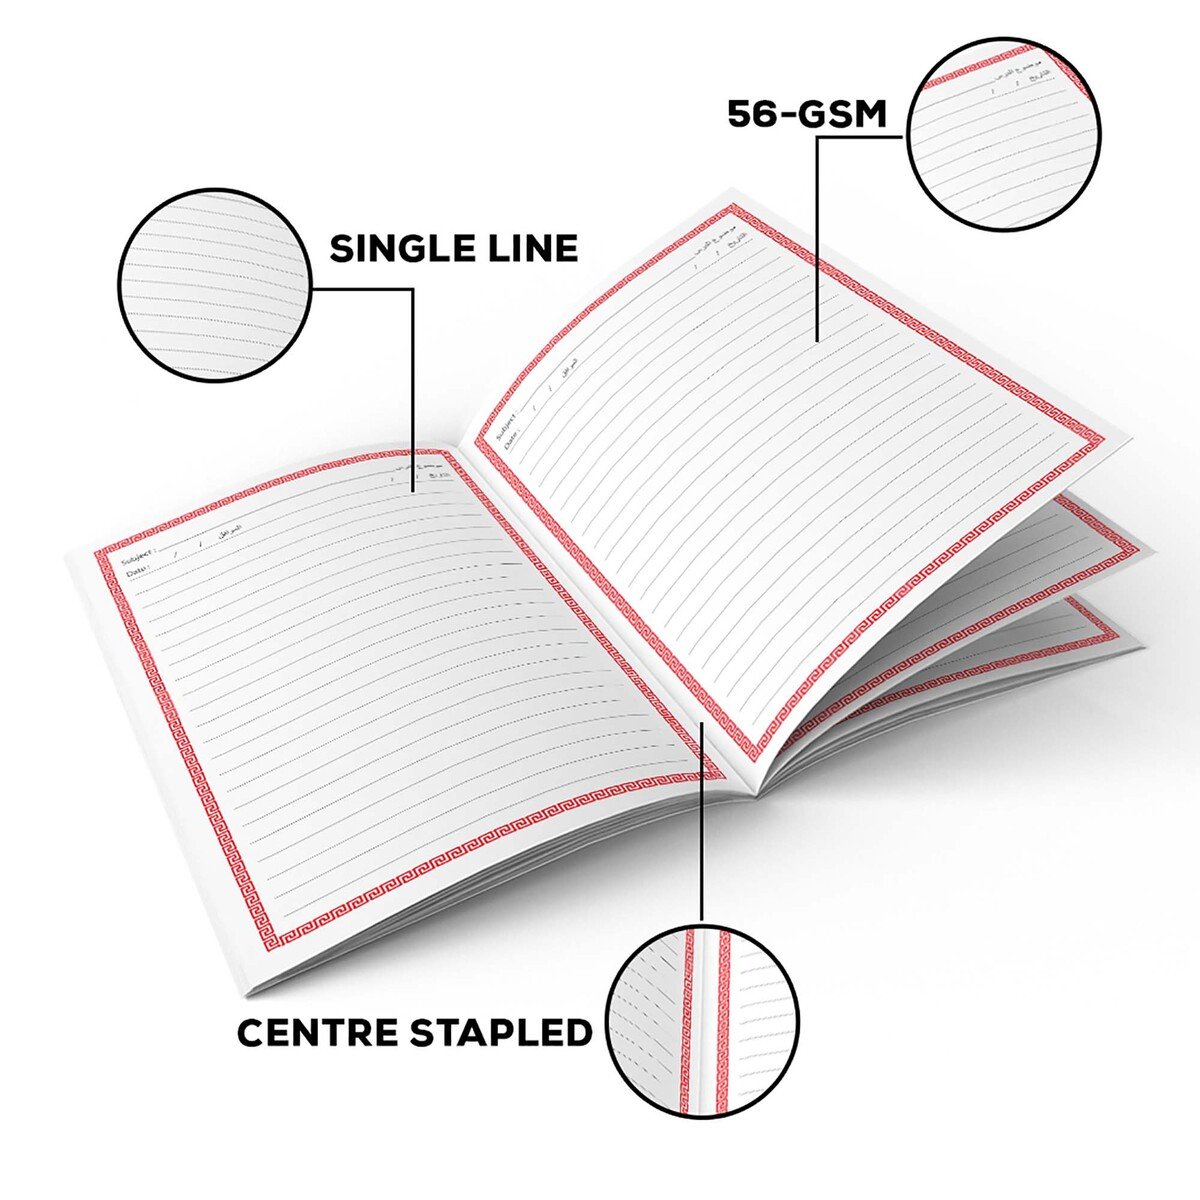 Classmate Exercise Book Centre Stapled 220x160mm 56-GSM Single Line (Arabic) 200 Pages Assorted